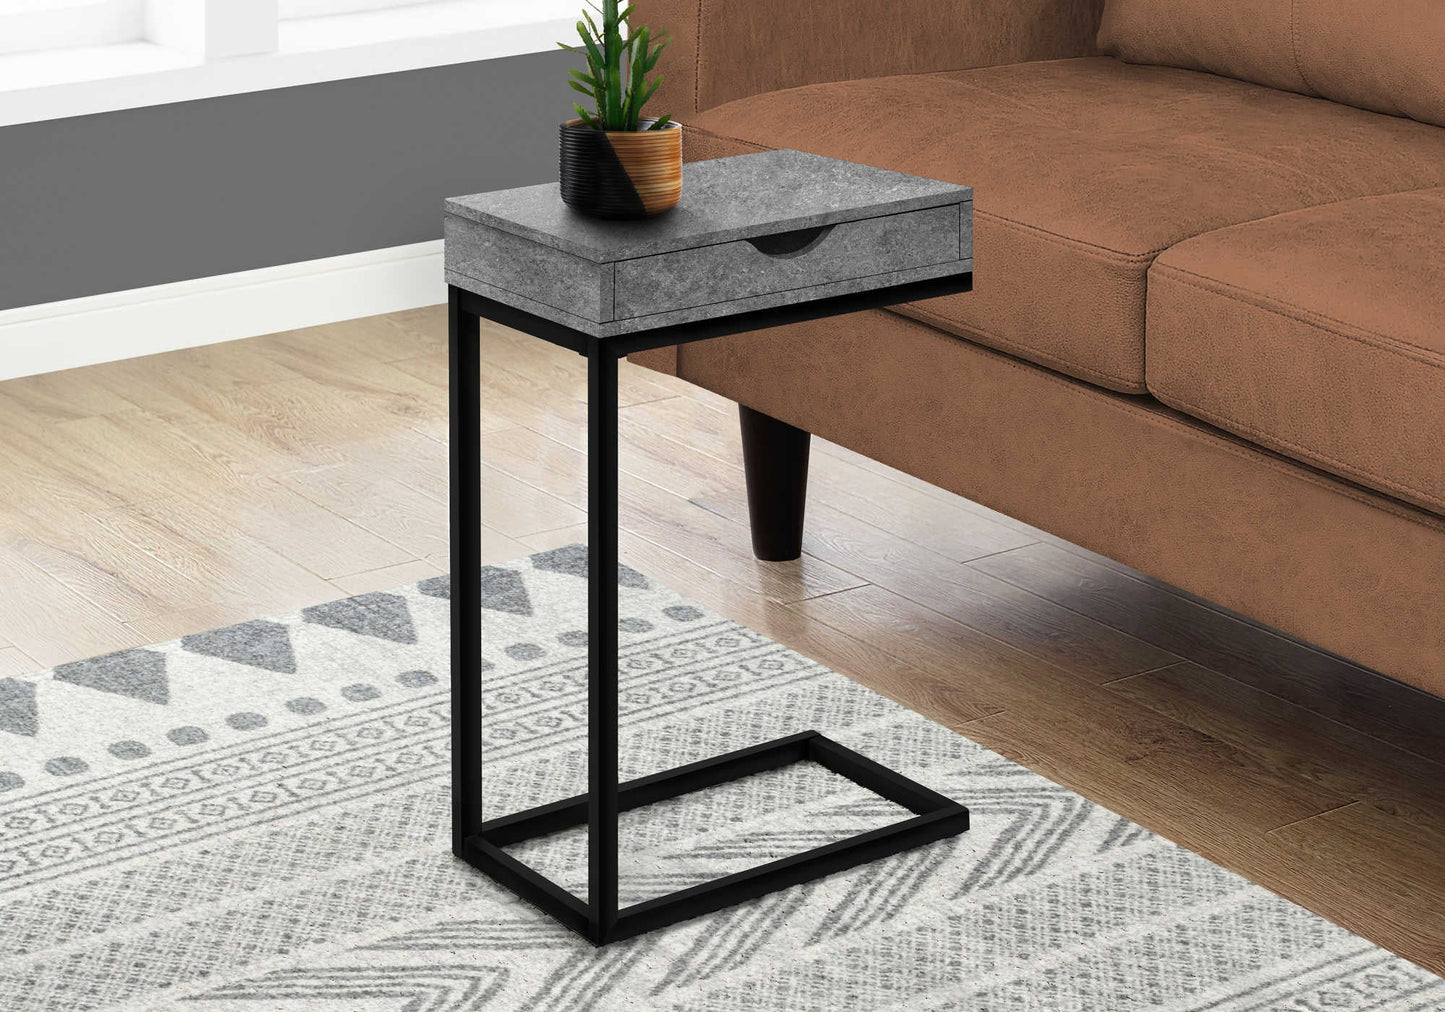 16" L / 24.5" H Modern C-Style Metal Bedroom End Table with Drawer